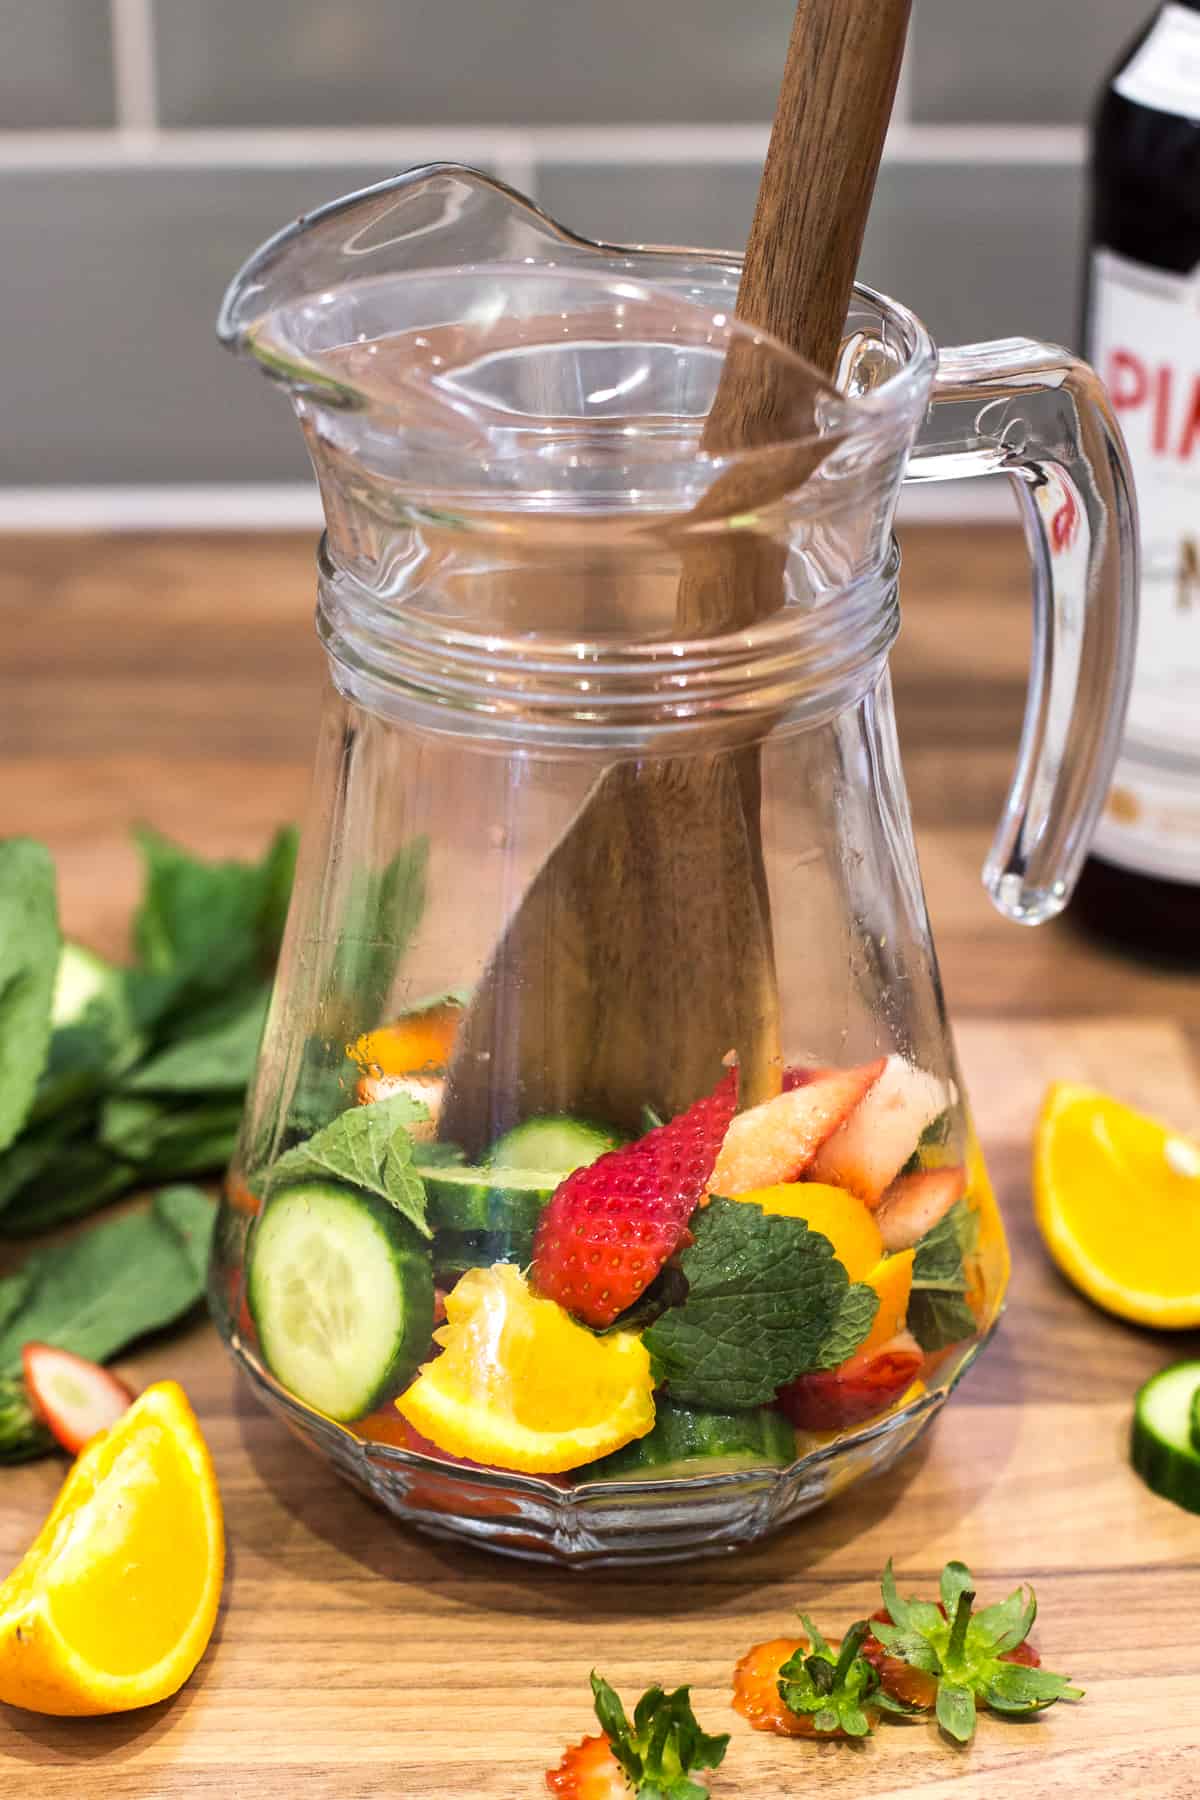 Cucumber, oranges and strawberries in a large glass jug.